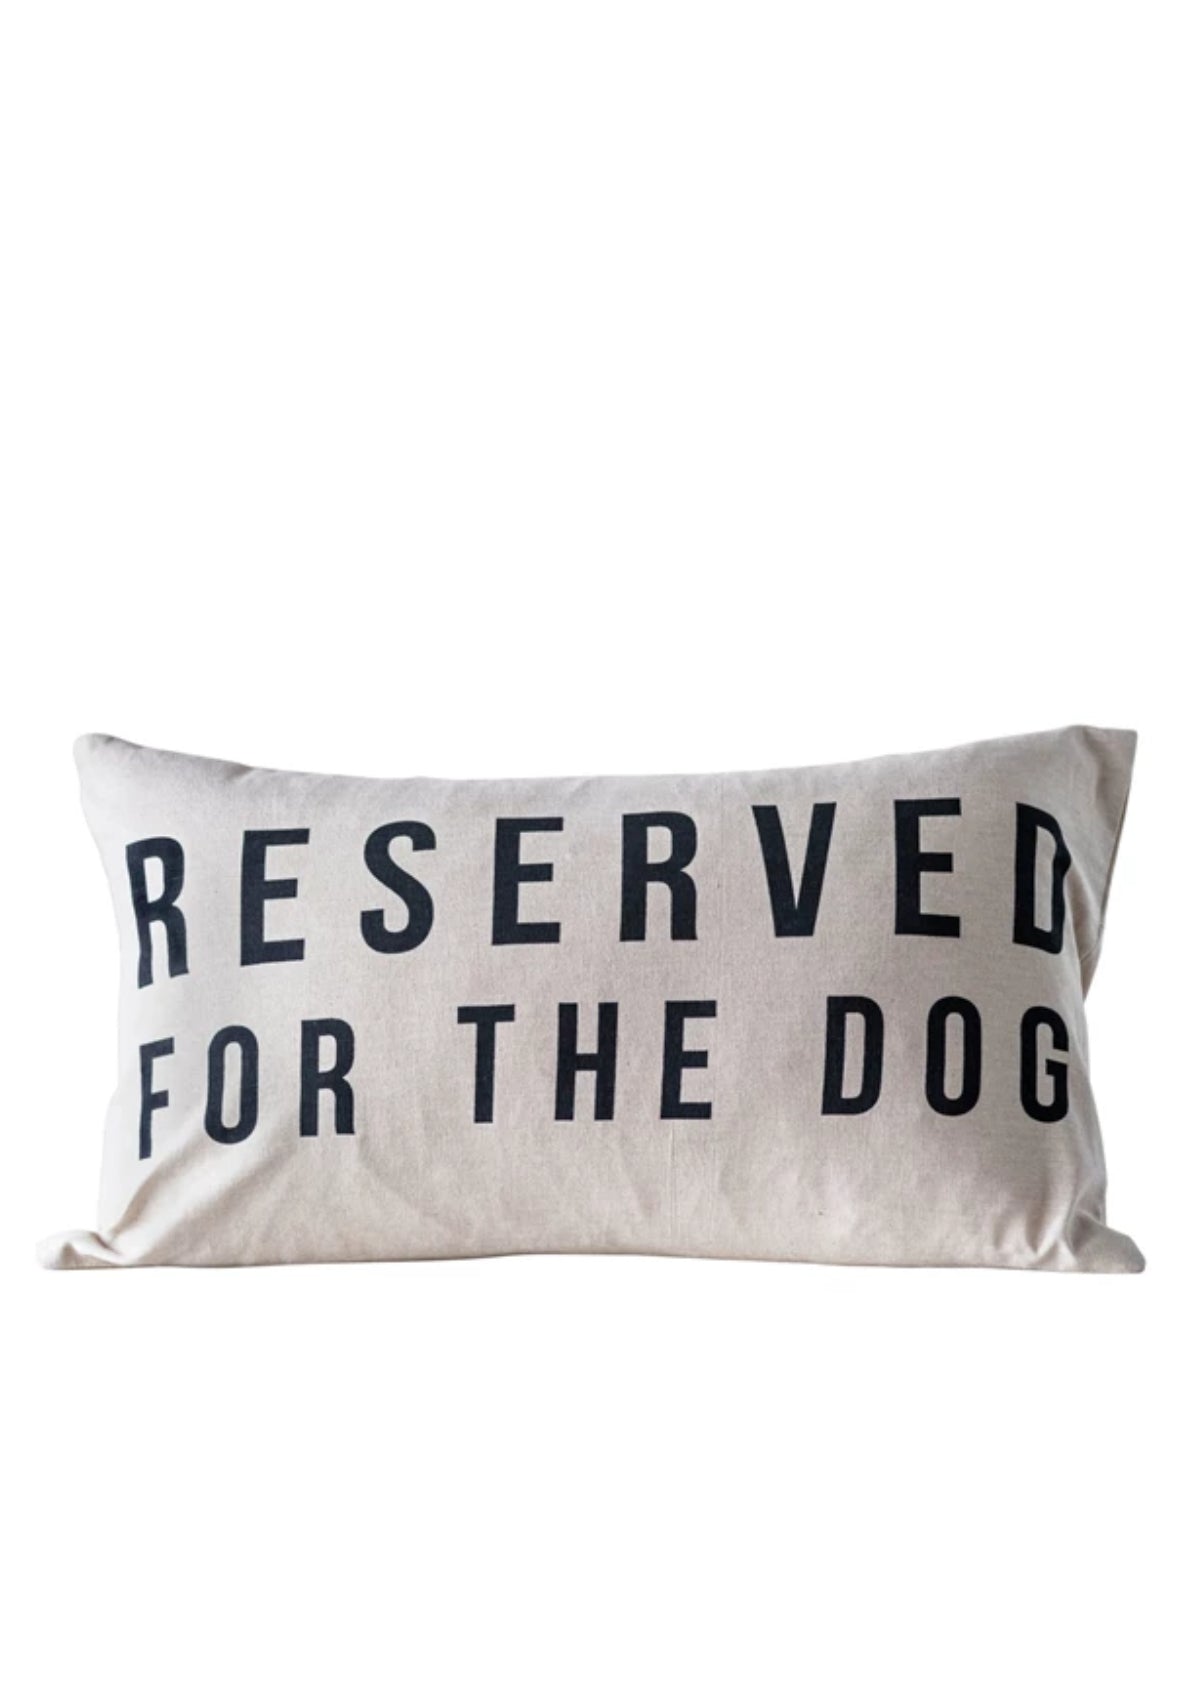 Reserved for the Dog Cotton Lumbar Pillow -Creative Co-op- Ruby Jane-